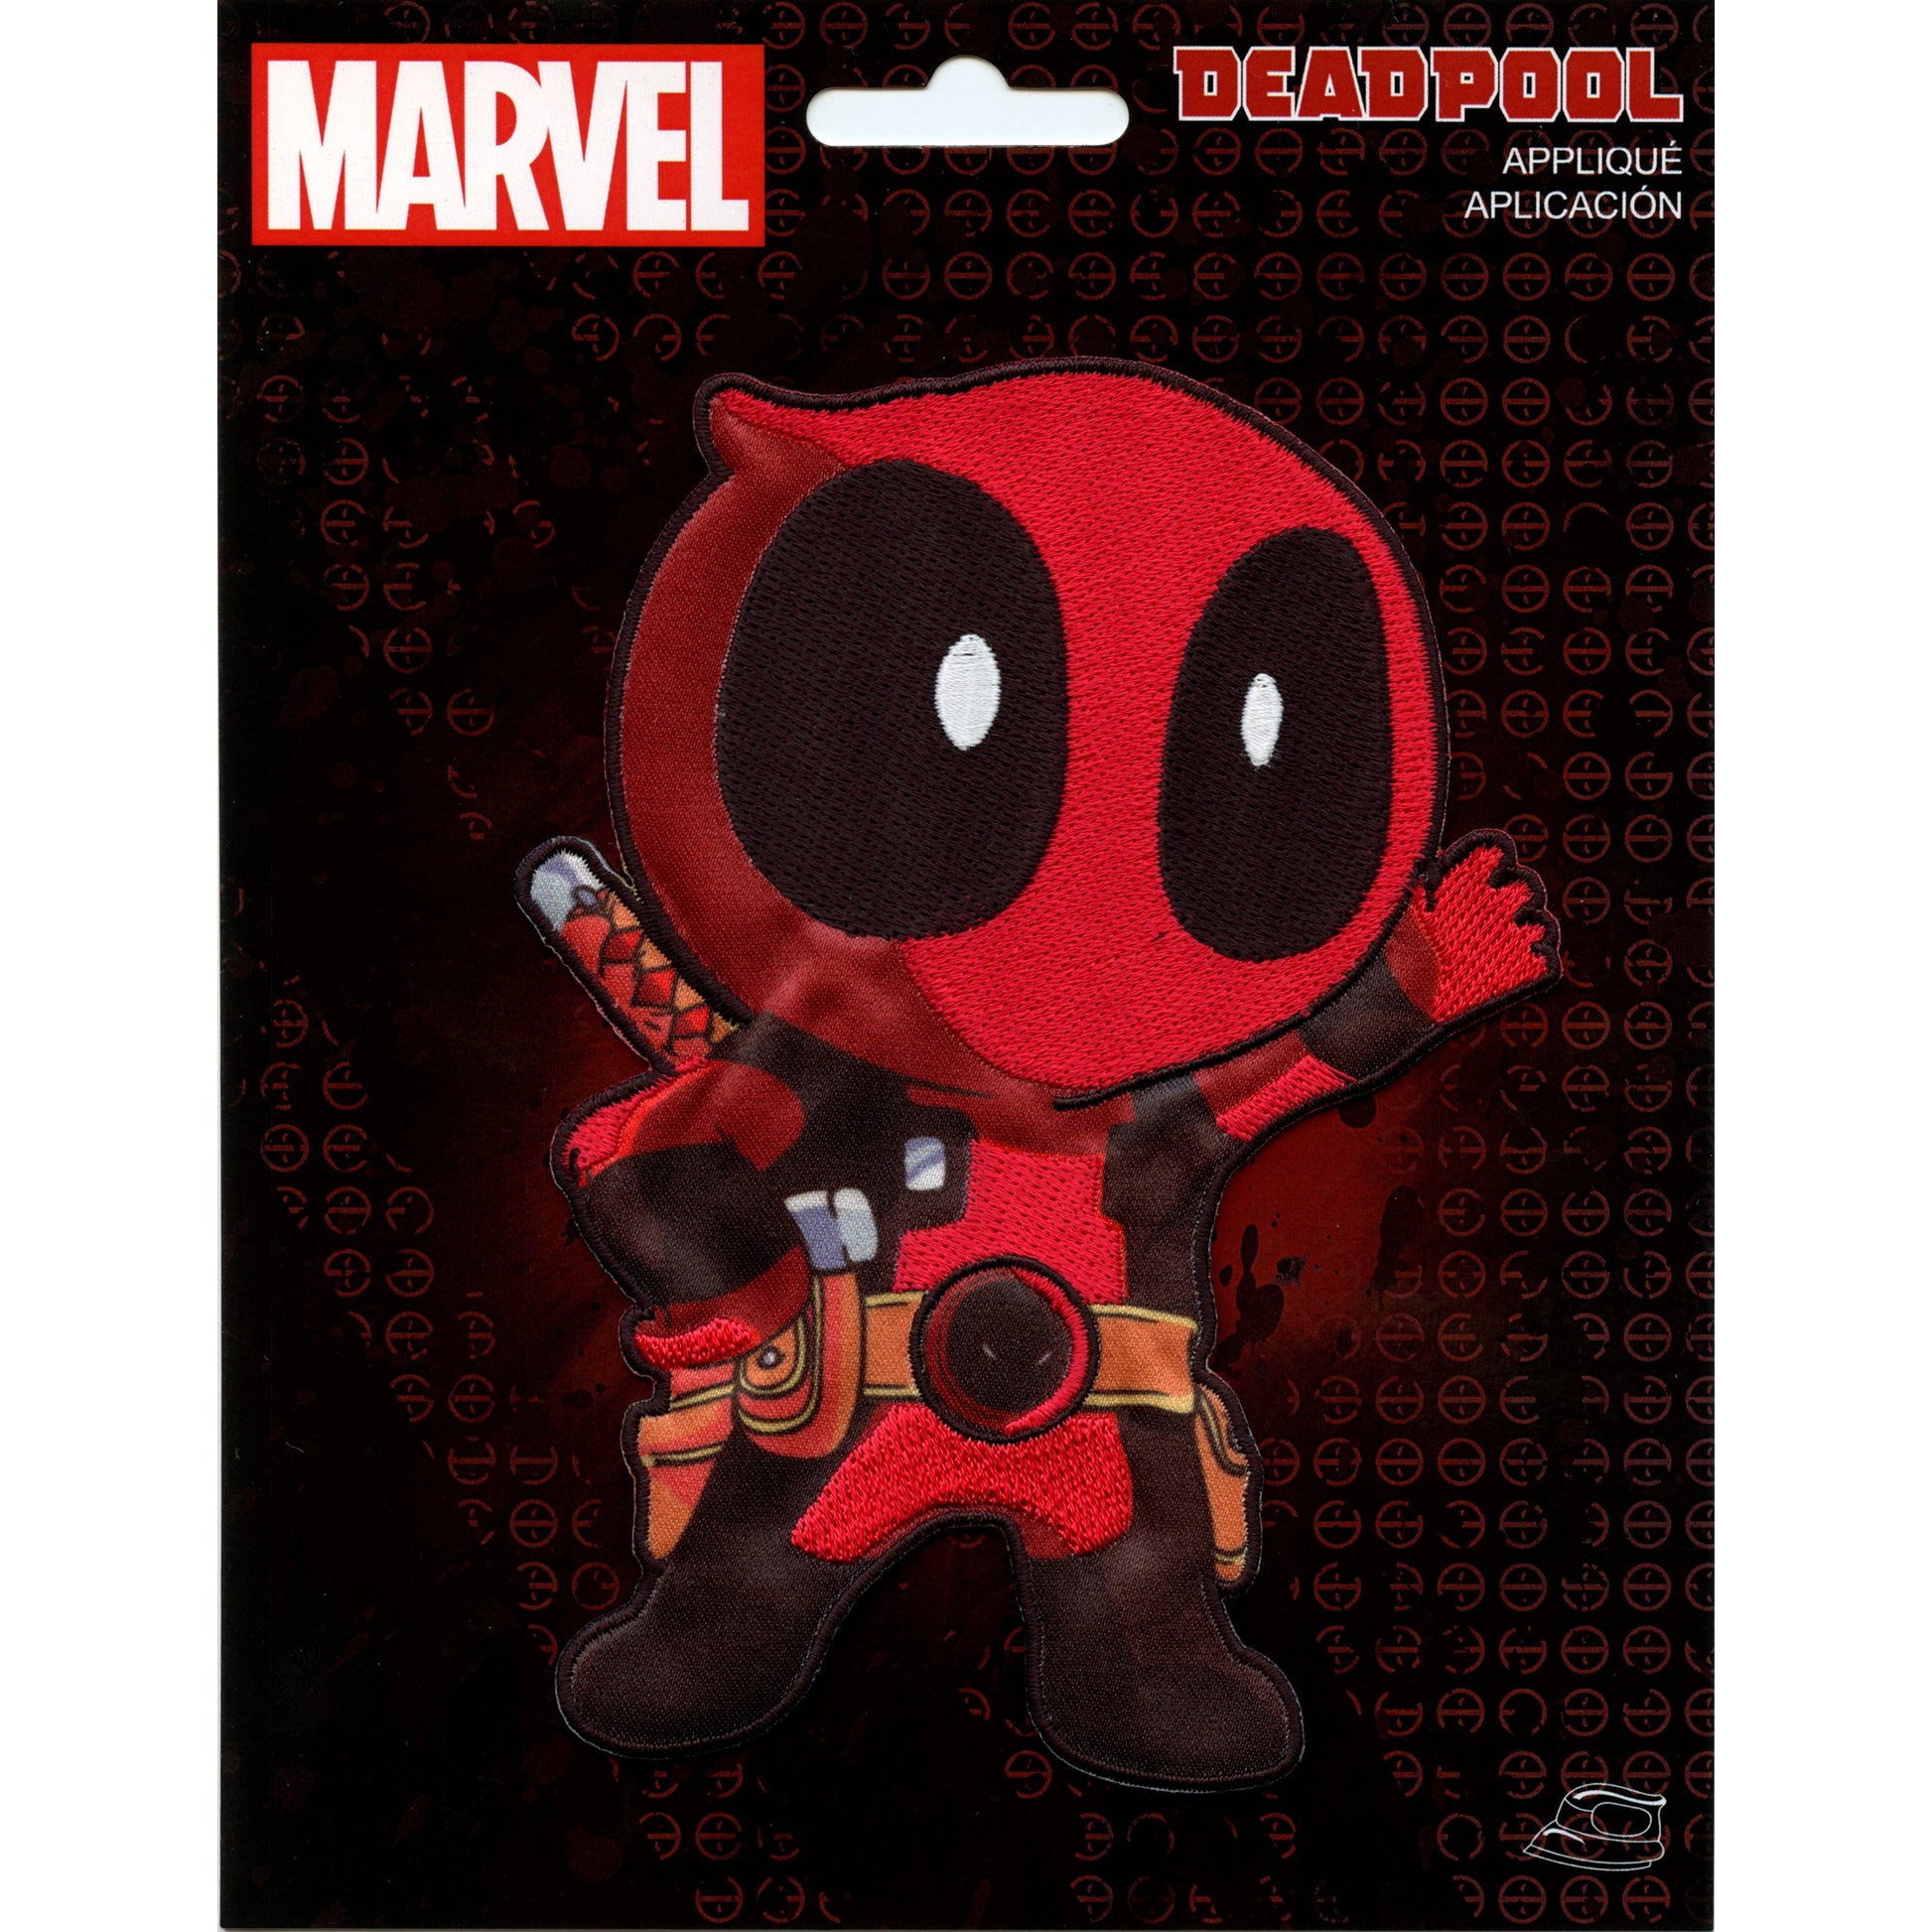 Marvel Animated Deadpool Character Embroidered Iron On Applique Patch 